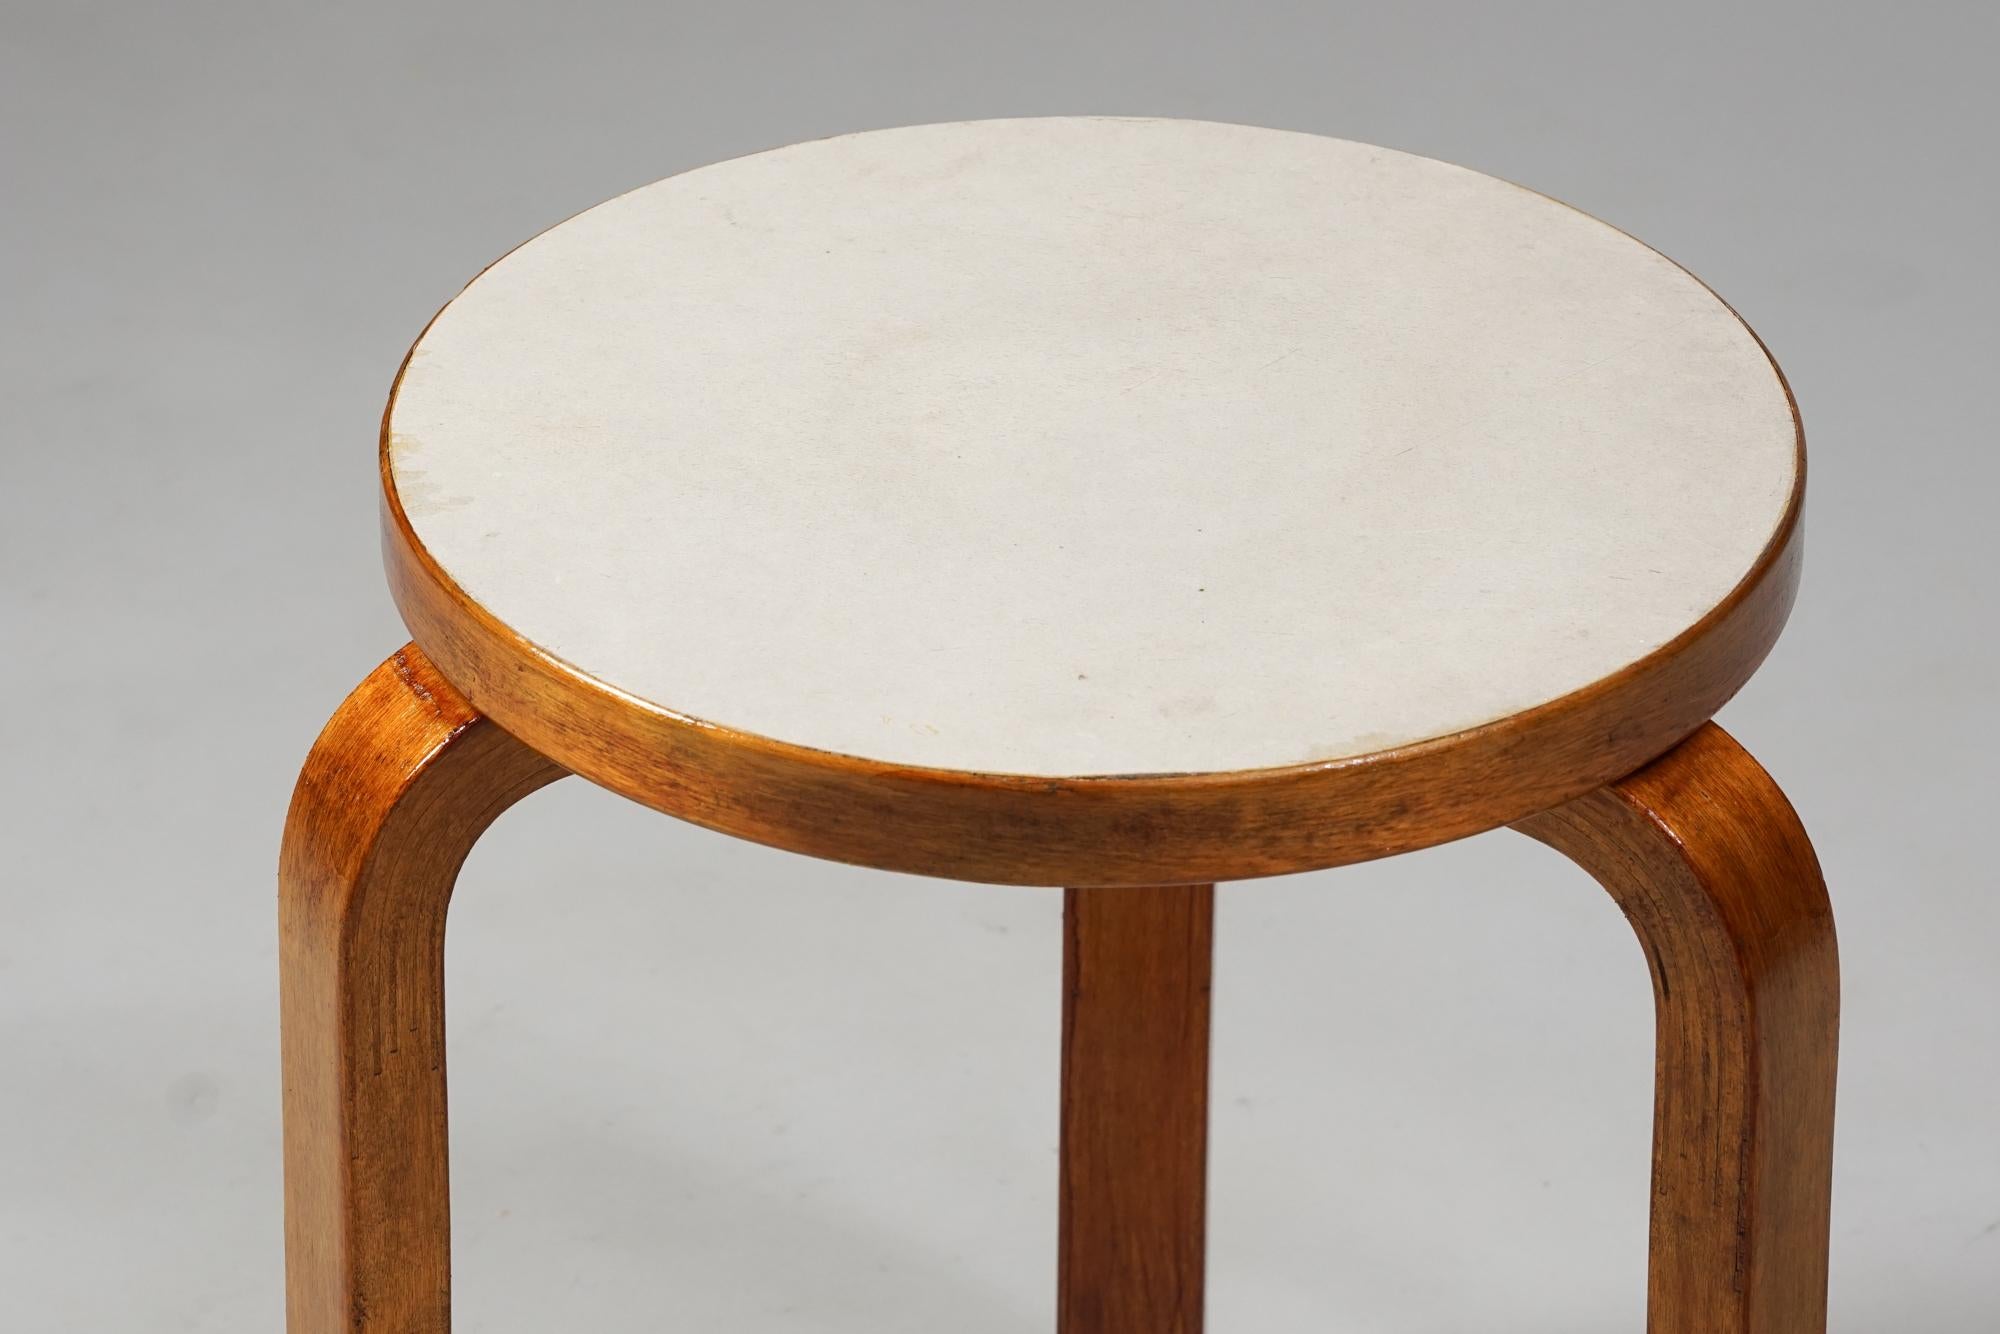 Stool model 60 by Alvar Aalto for Artek from the 1950s. Lacquered birch and linoleum top. Good vintage condition, rich patina and wear consistent with age and use. Iconic Alvar Aalto design. 